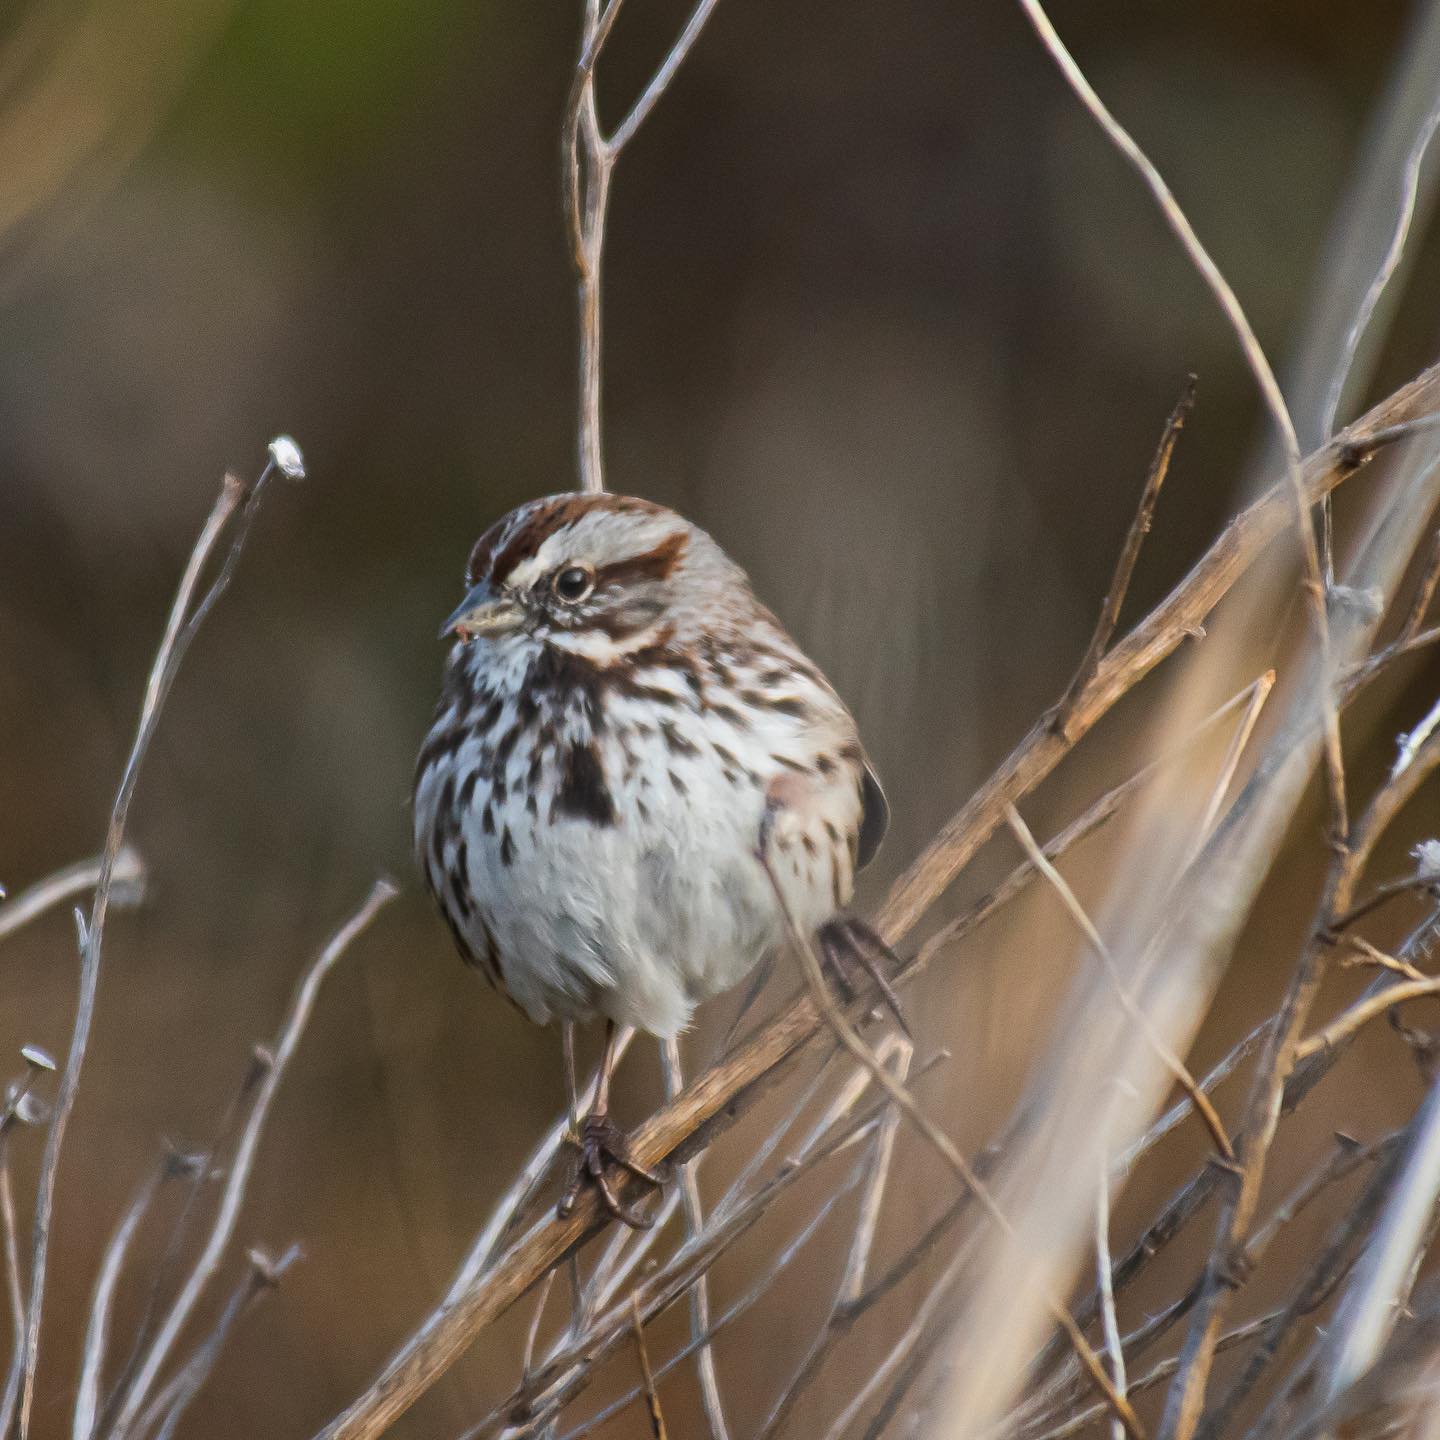 A Song sparrow sings from the rushes along the Martinez Shoreline Sunday morning.